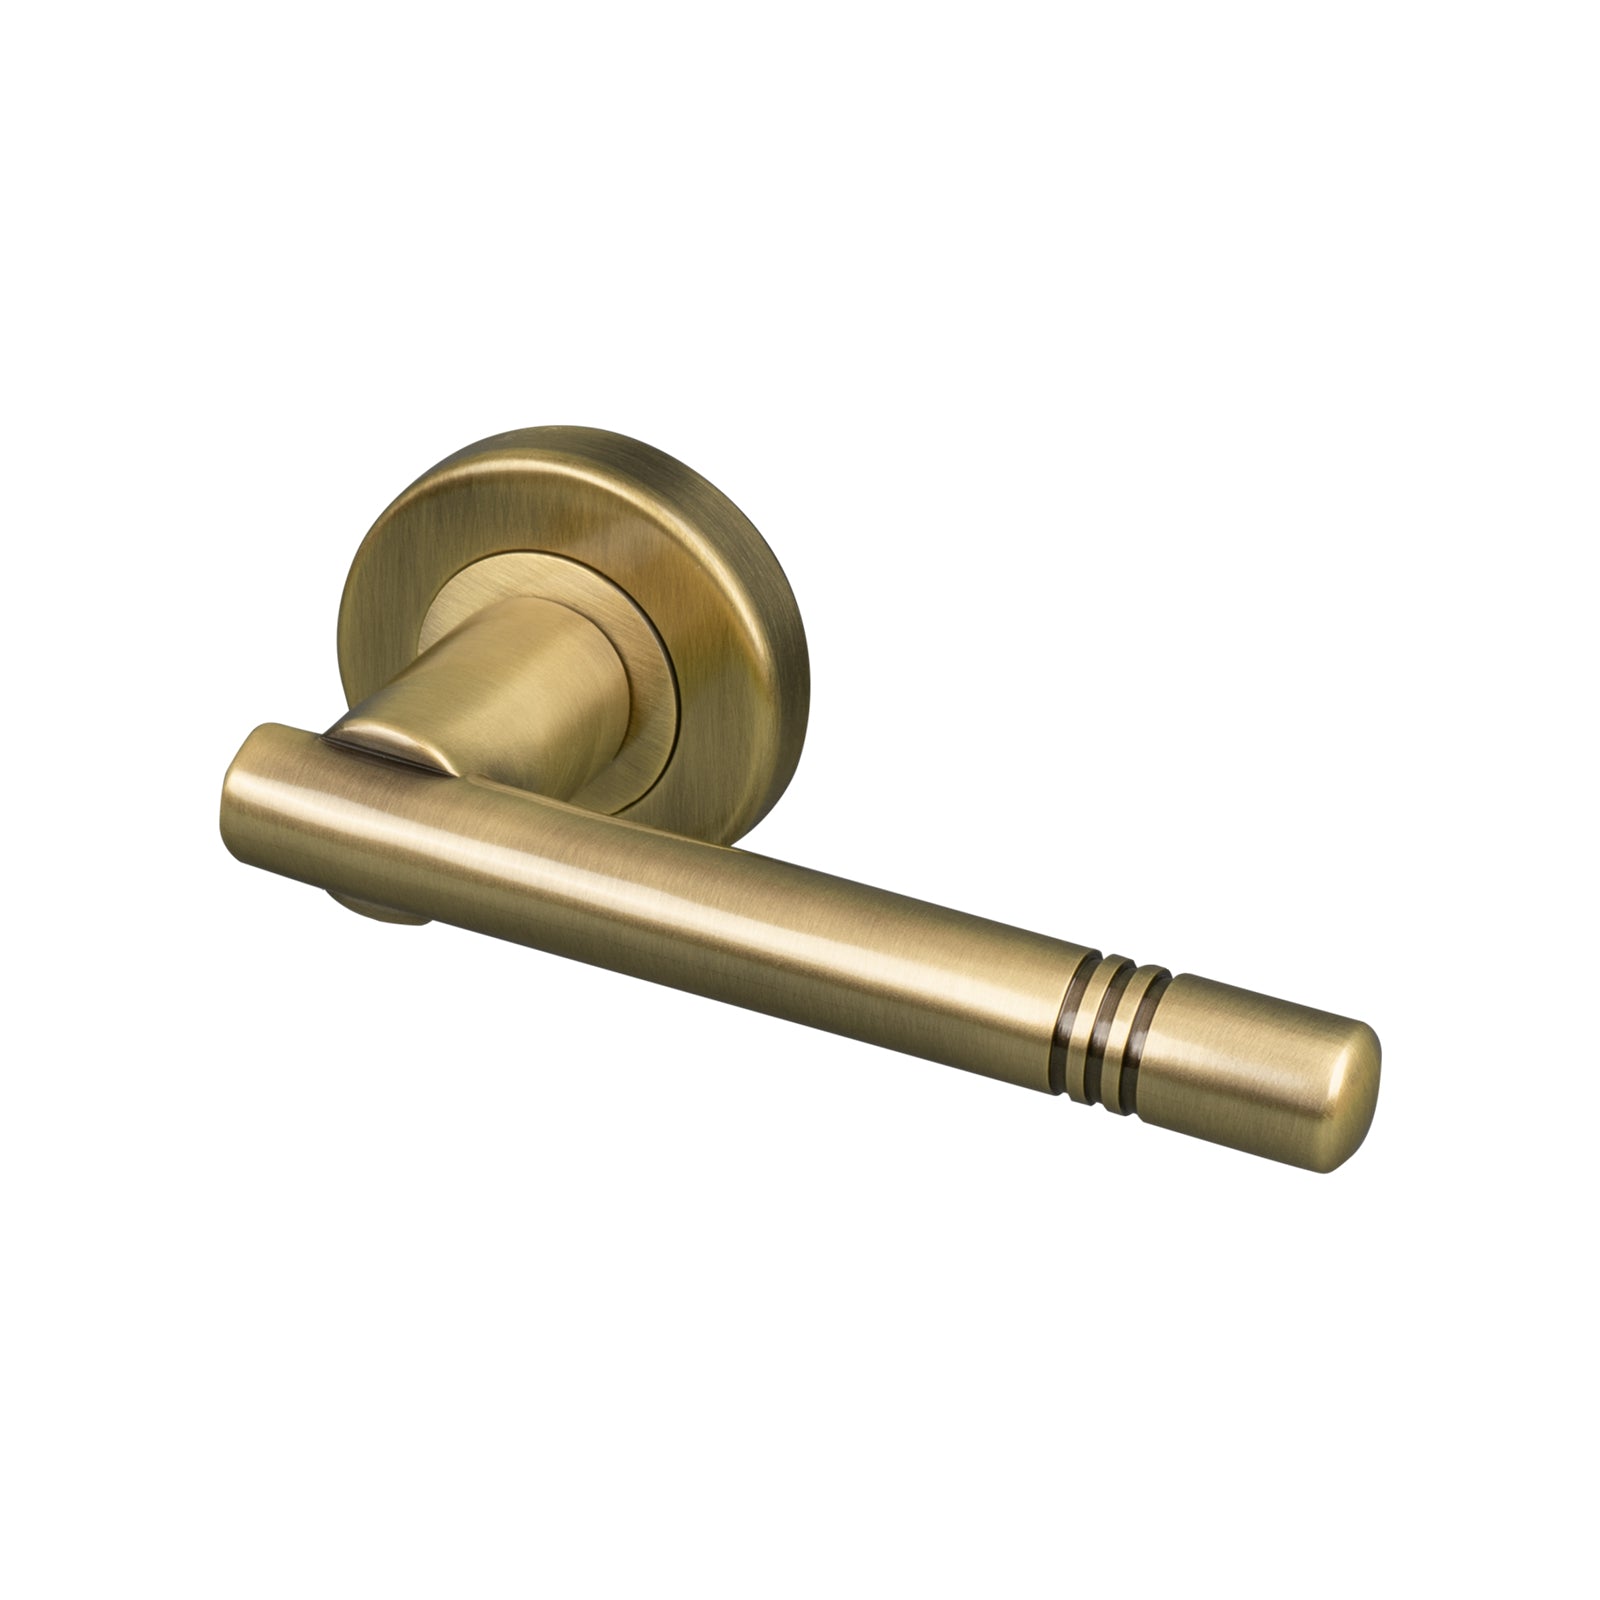 Aged brass Alicia round rose door handles, lever on rose handles SHOW